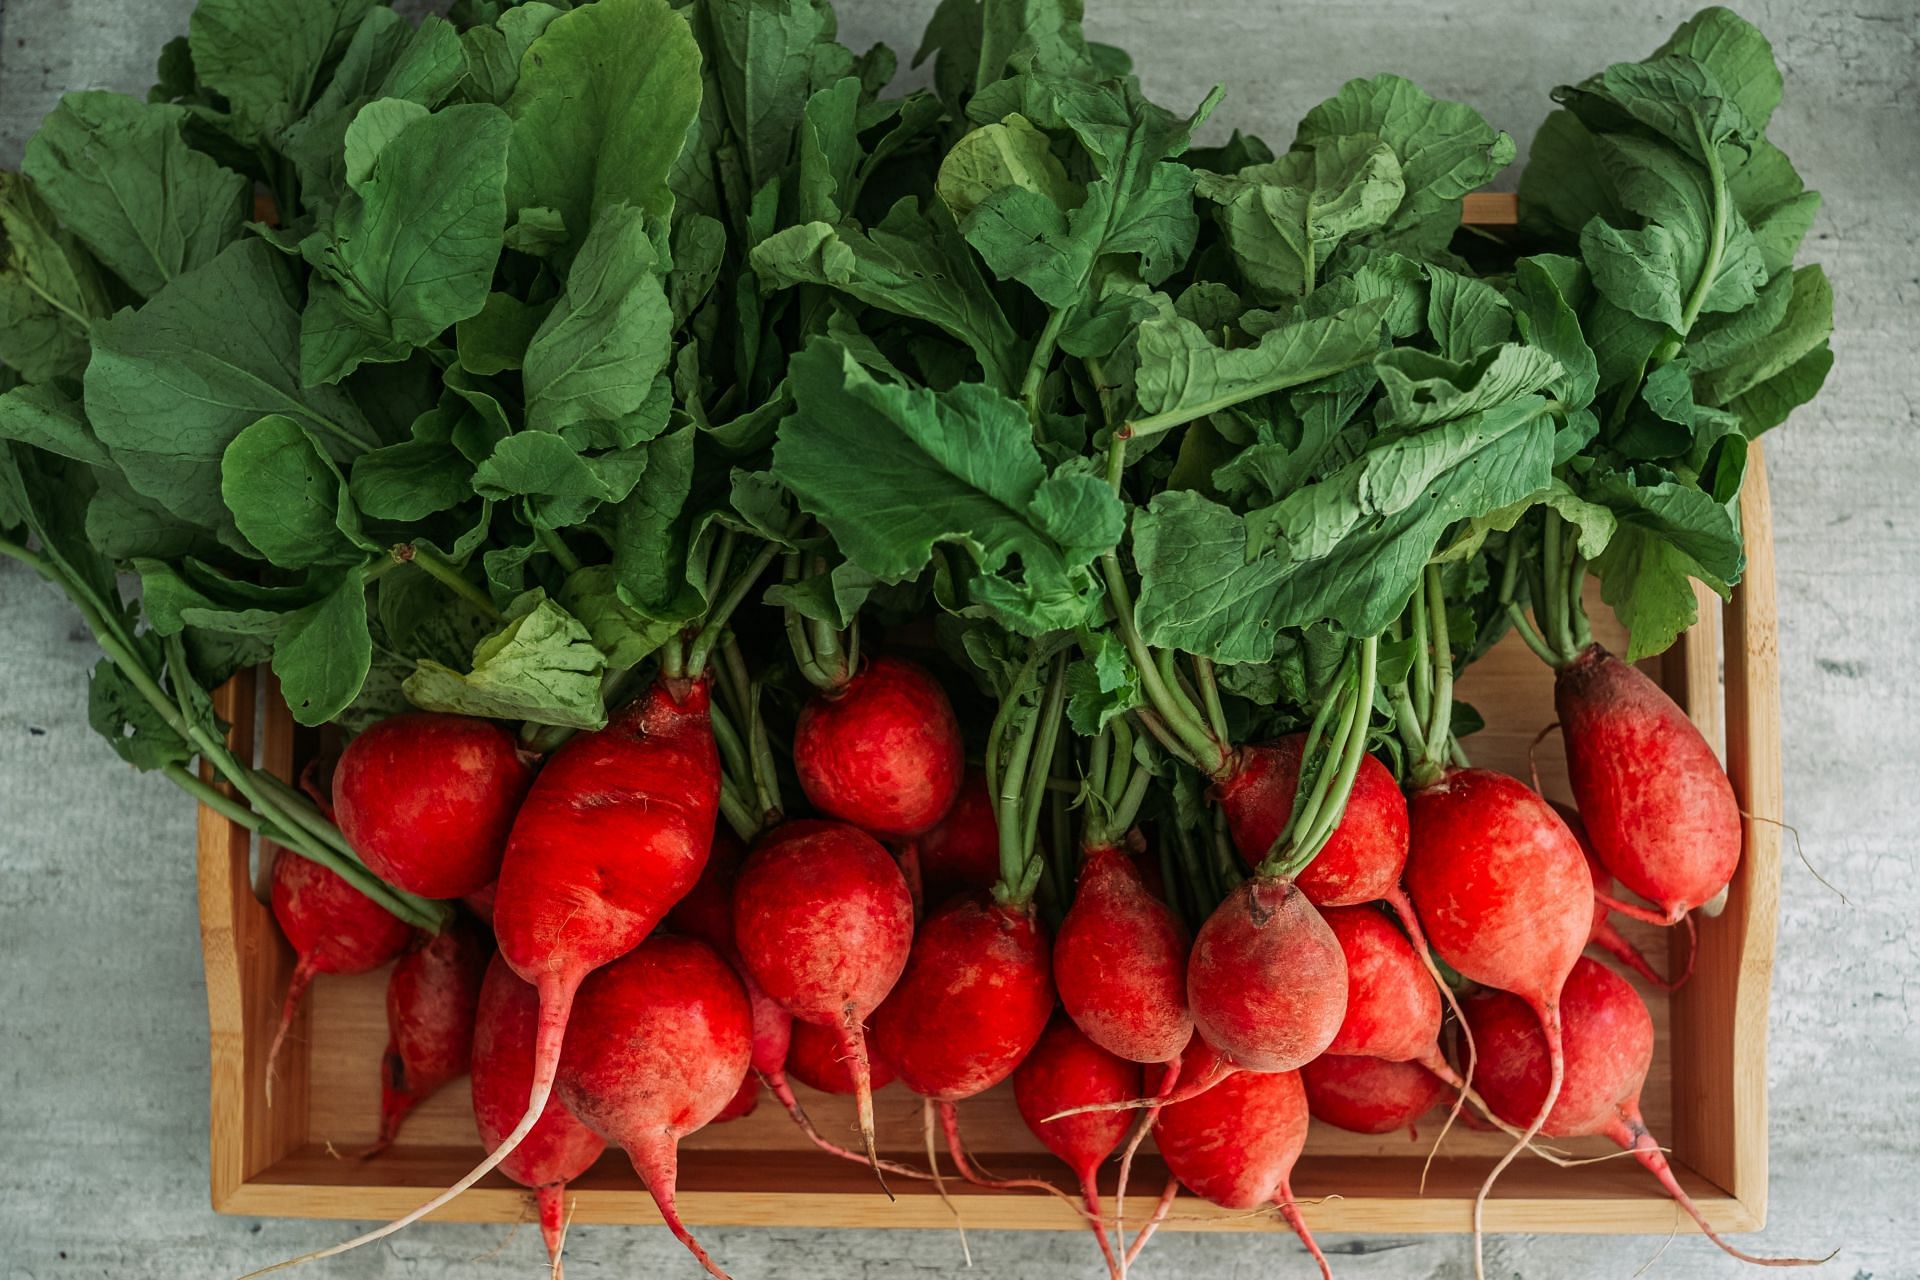 Benefits of adding red fruits and vegetables to your diet (image sourced via Pexels / Photo by Stanislav)